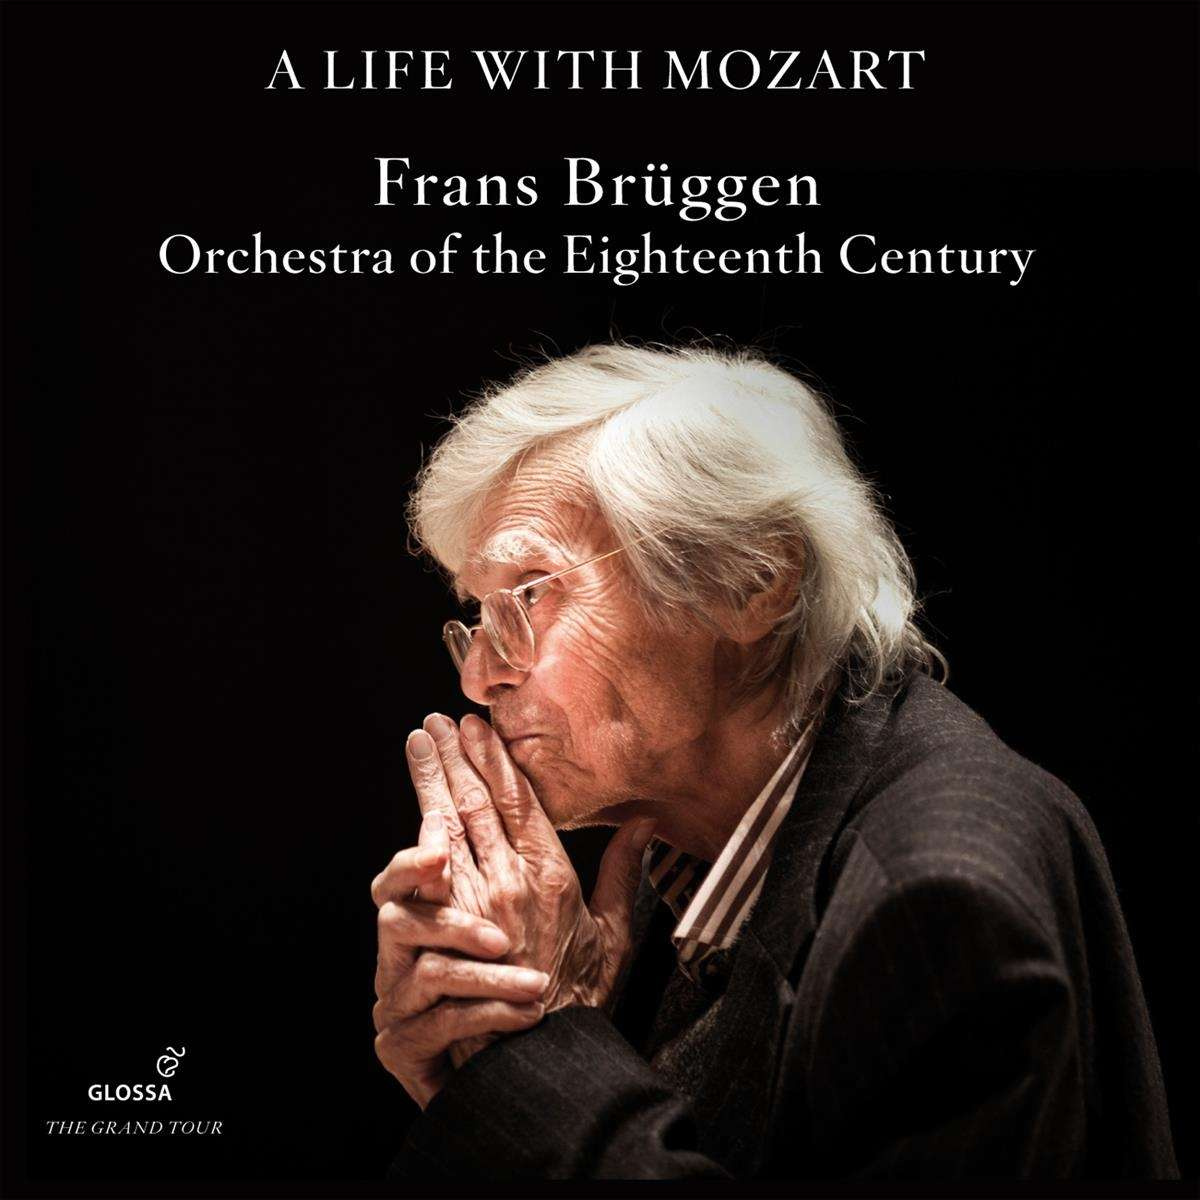 MOZART: A LIFE WITH MOZART